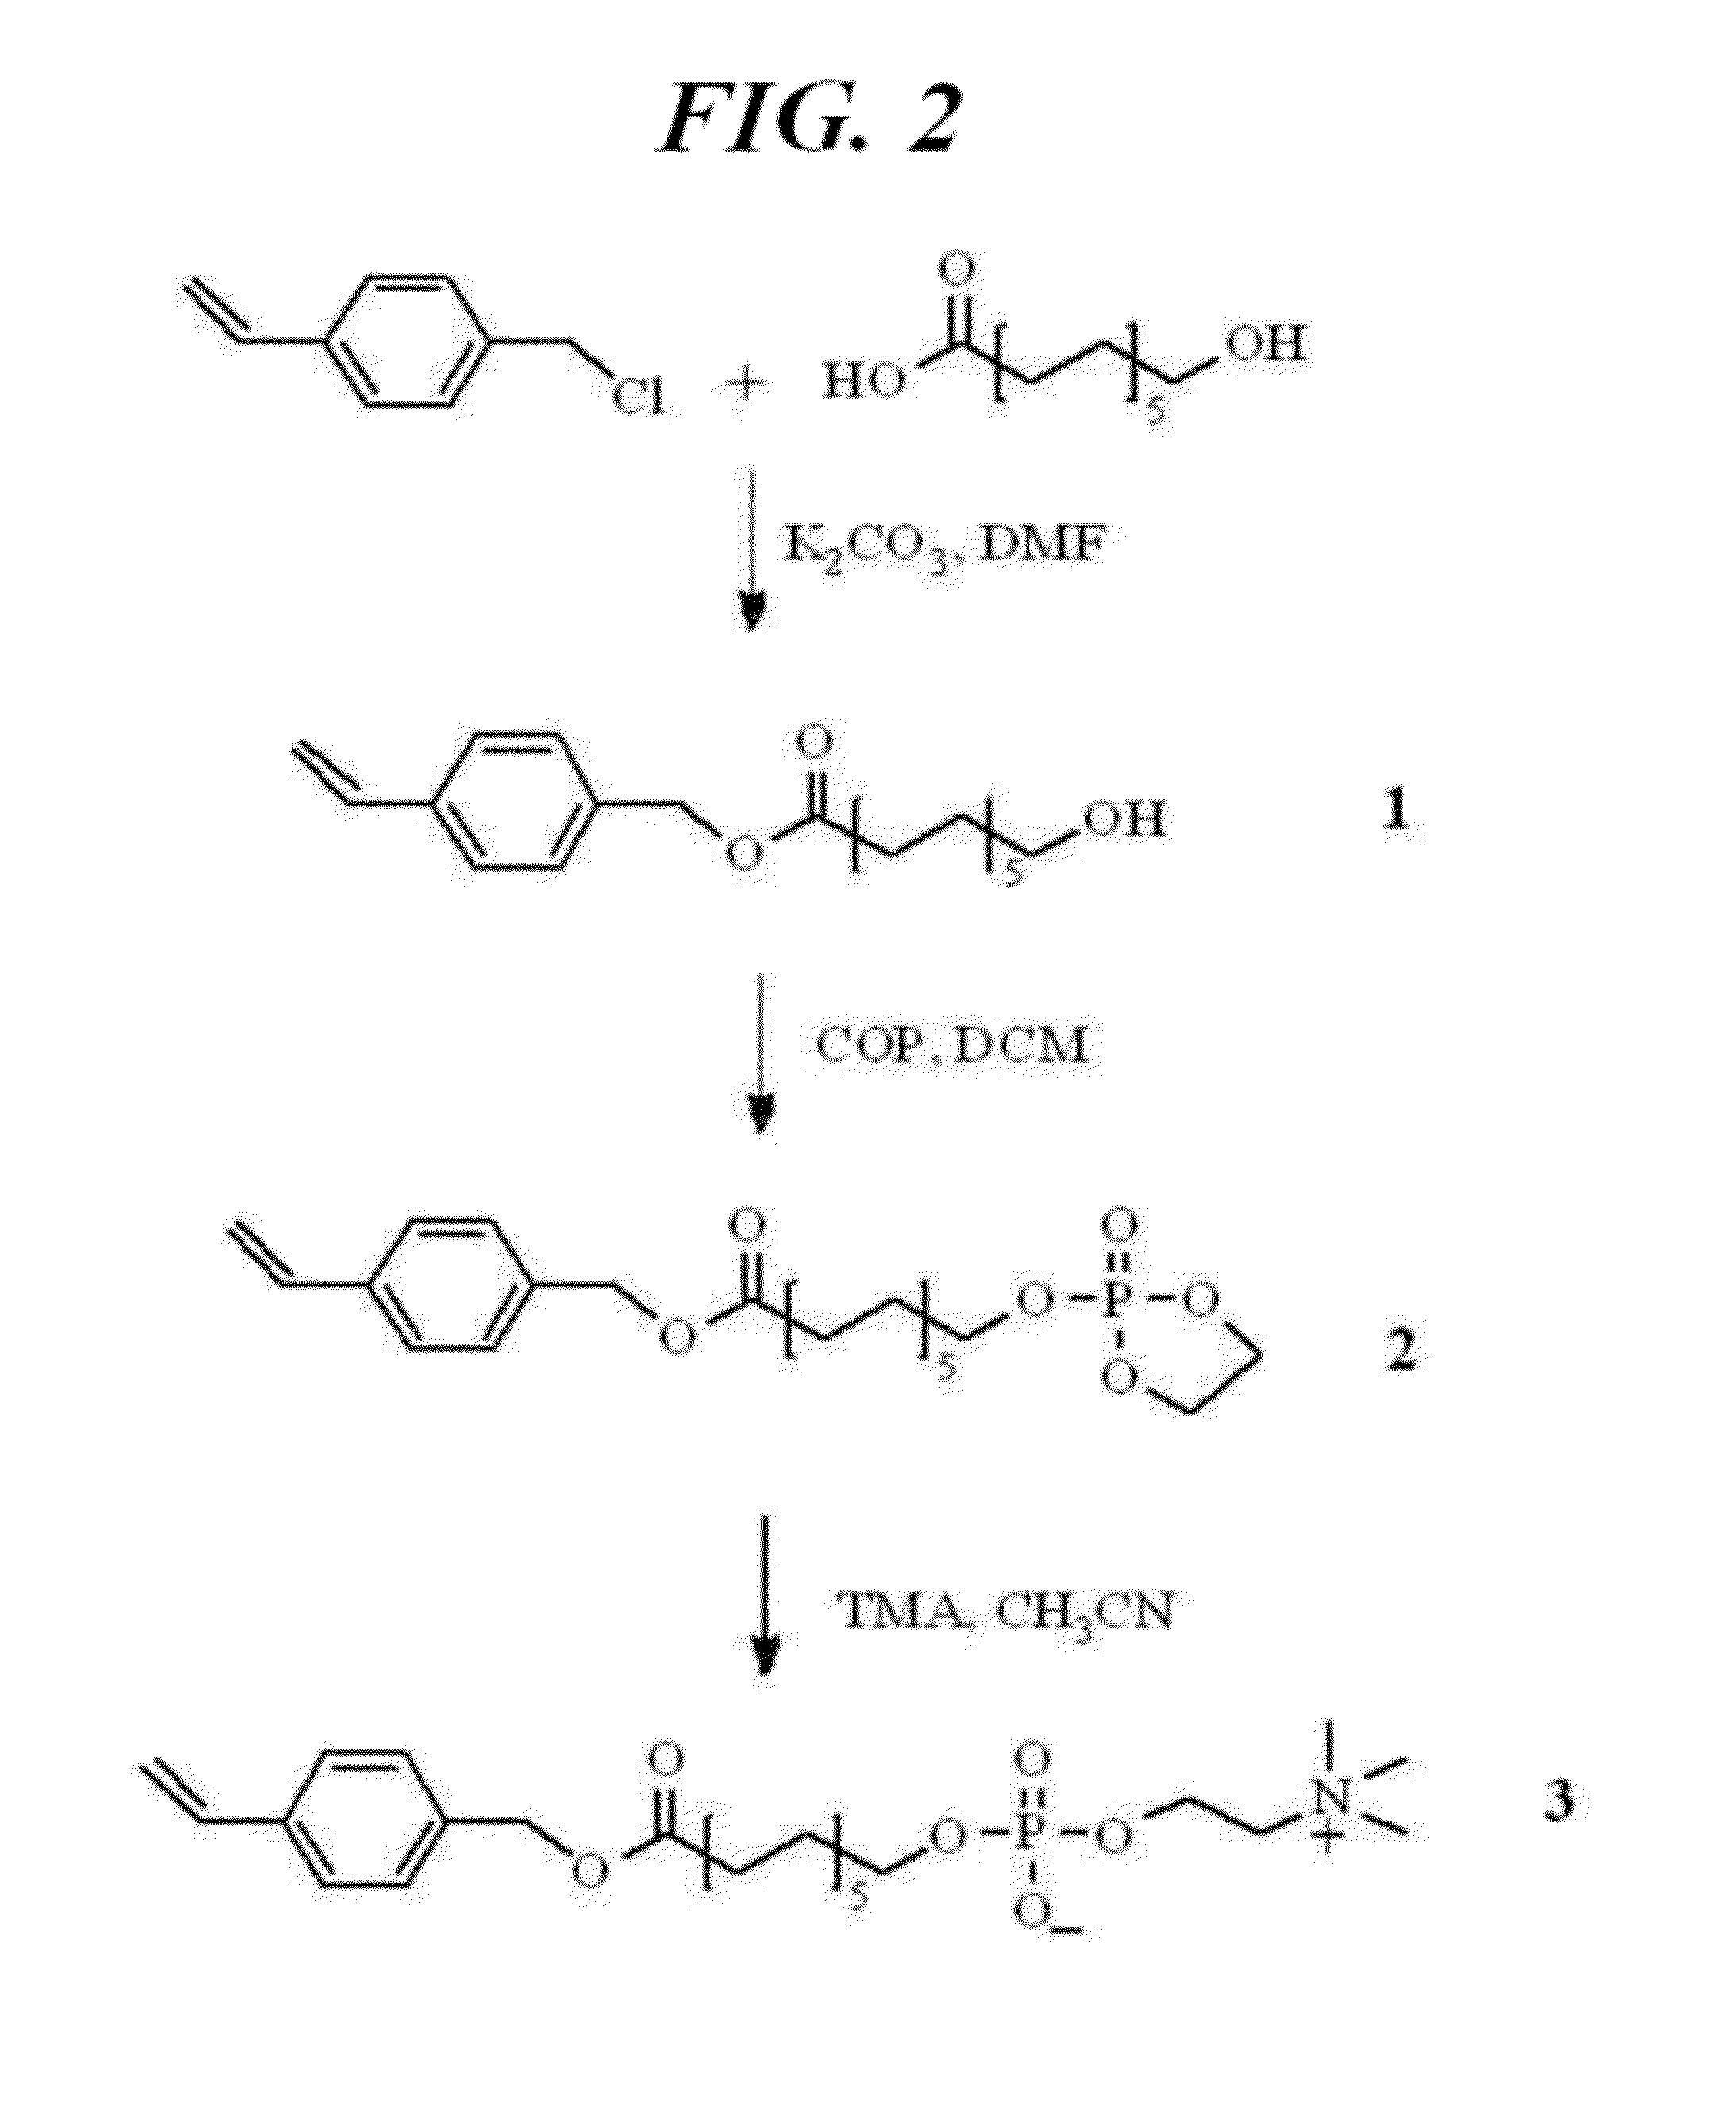 Molecularly printed polymer for detecting the pentraxin, and method for preparing same